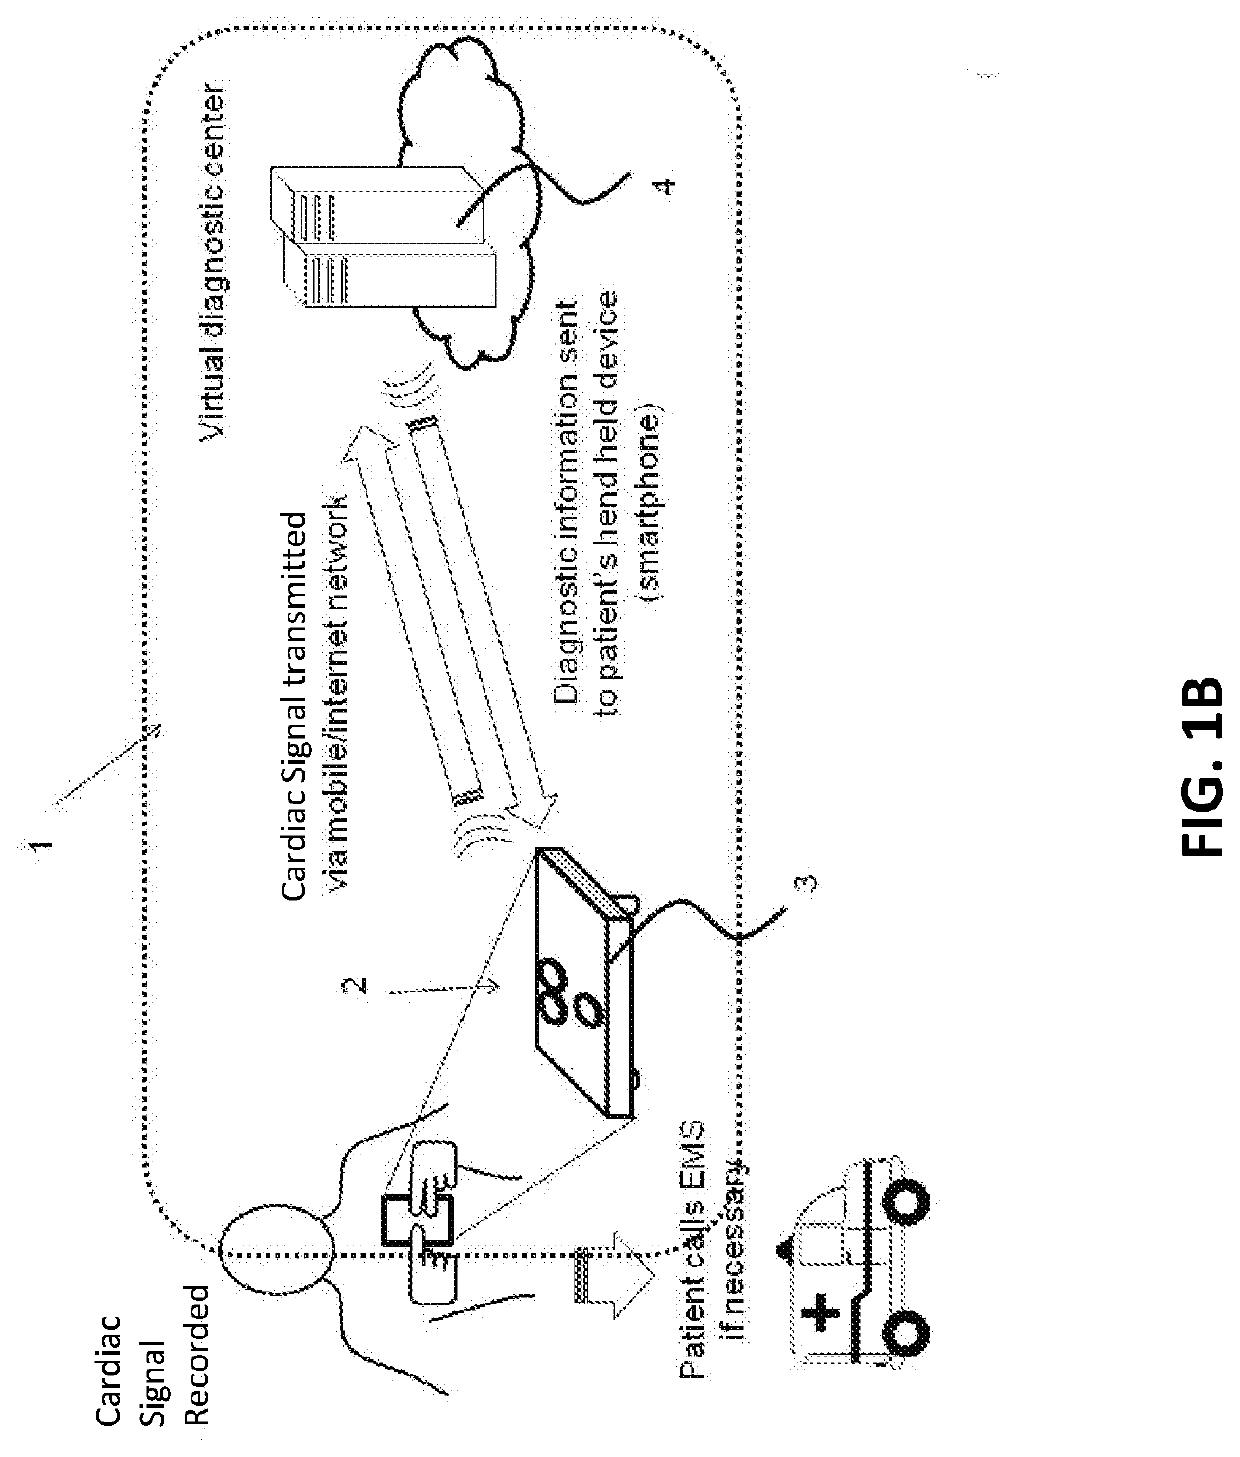 Hand held device for automatic cardiac risk and diagnostic assessment